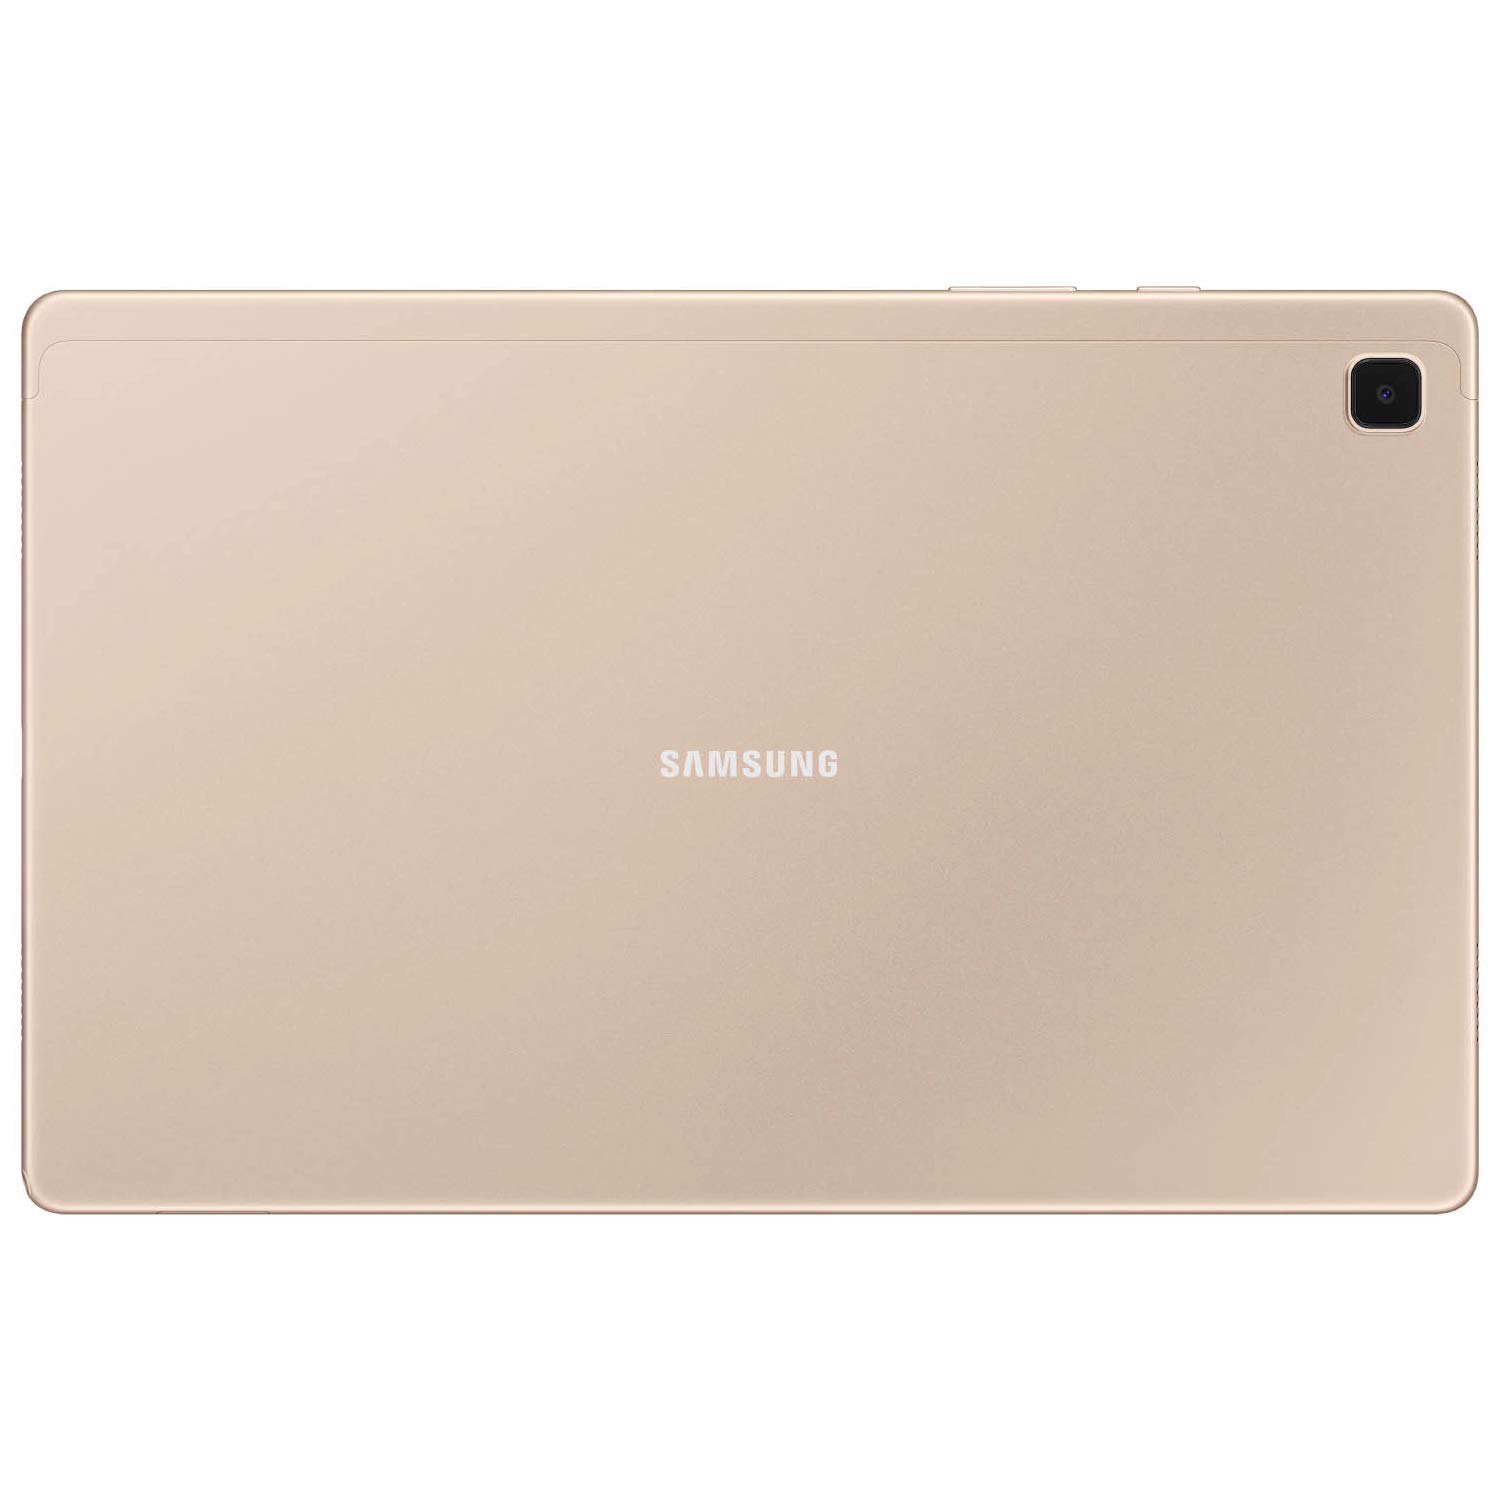 2020 Samsung Galaxy Tab A7 10.4” Inch 32 GB Wi-Fi Android 10 Touchscreen International Tablet (Gold) Bundle – Slim Trifold Hard Shell Case and 32GB Micro SD Card - image 3 of 8